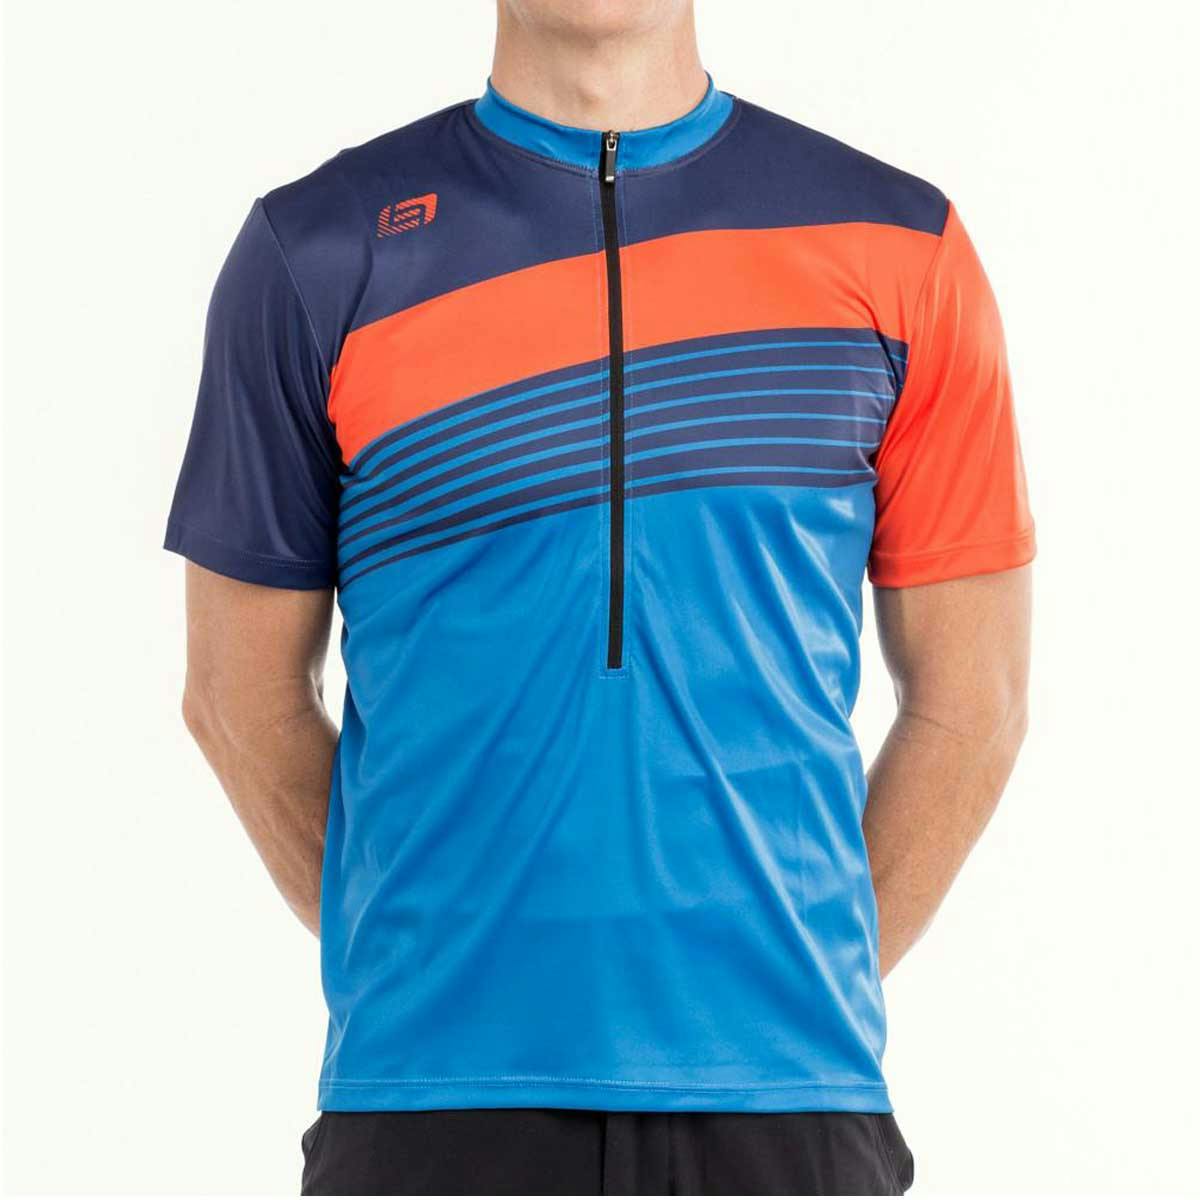 Bellwether Rock-it Men's Cycling Jersey - Pacific - XL